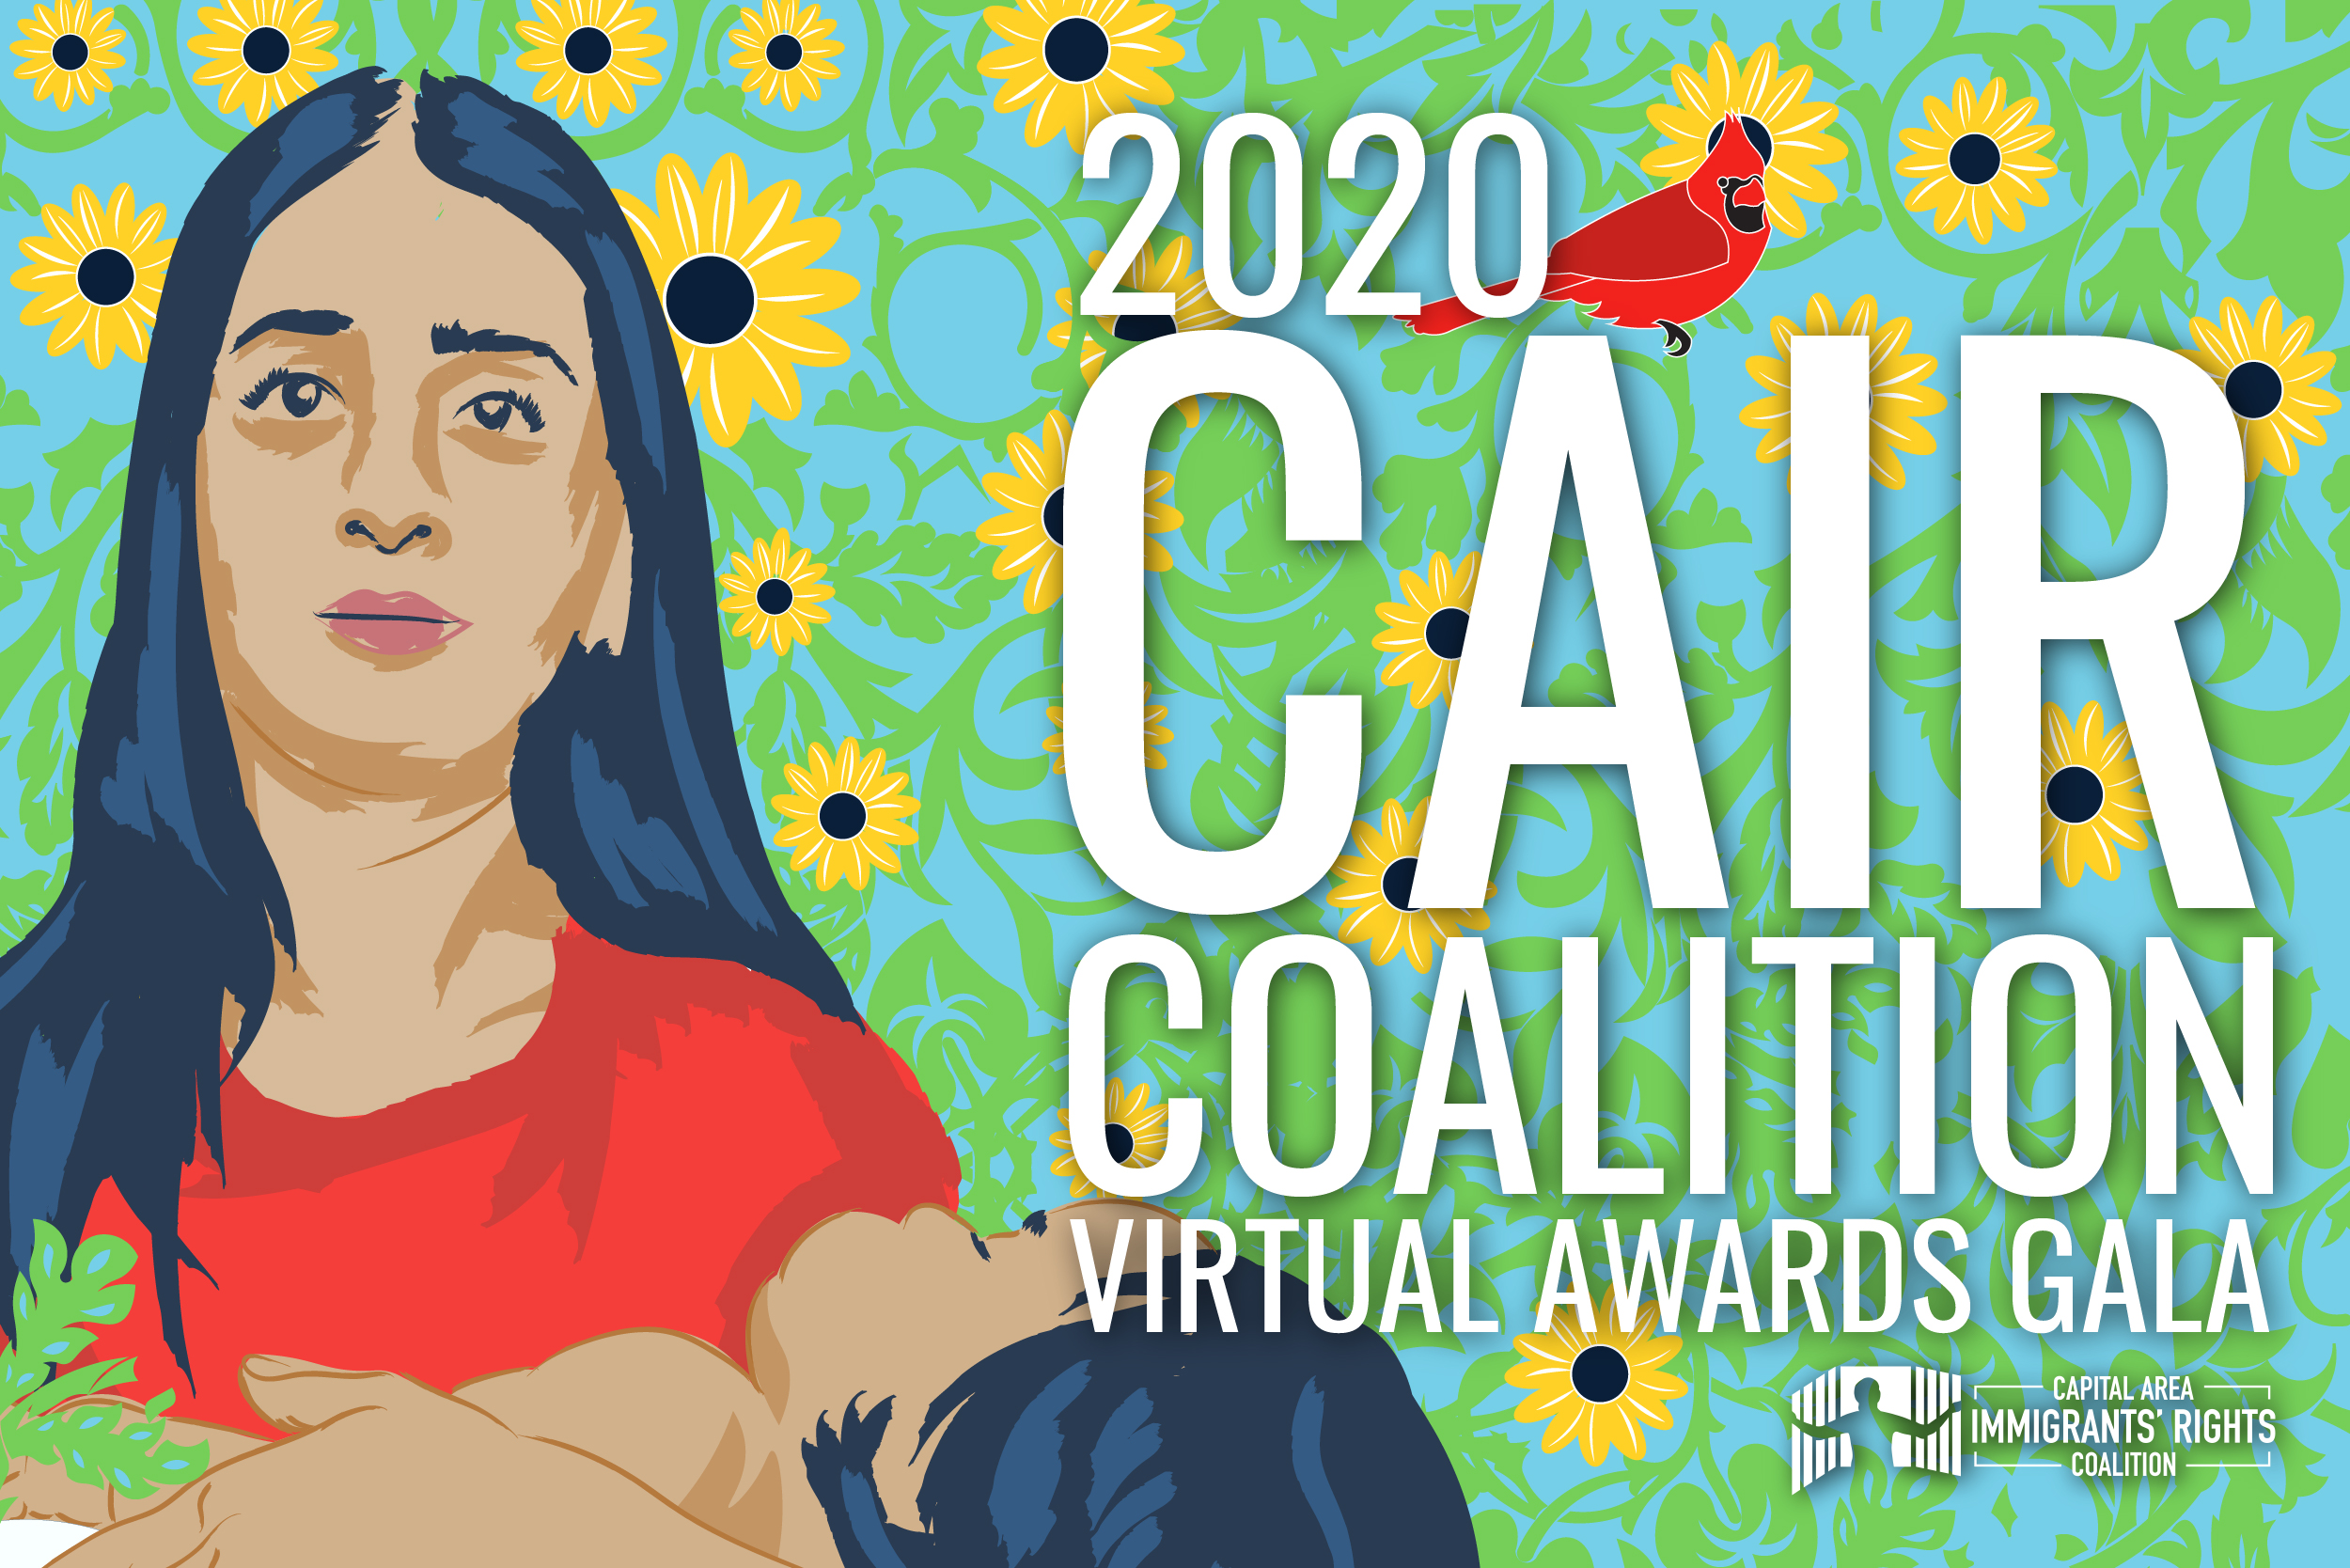 Image of a mom with dark hair holding a small child with a blue and green floral background. The text says CAIR Coalition Virtual Awards Gala.